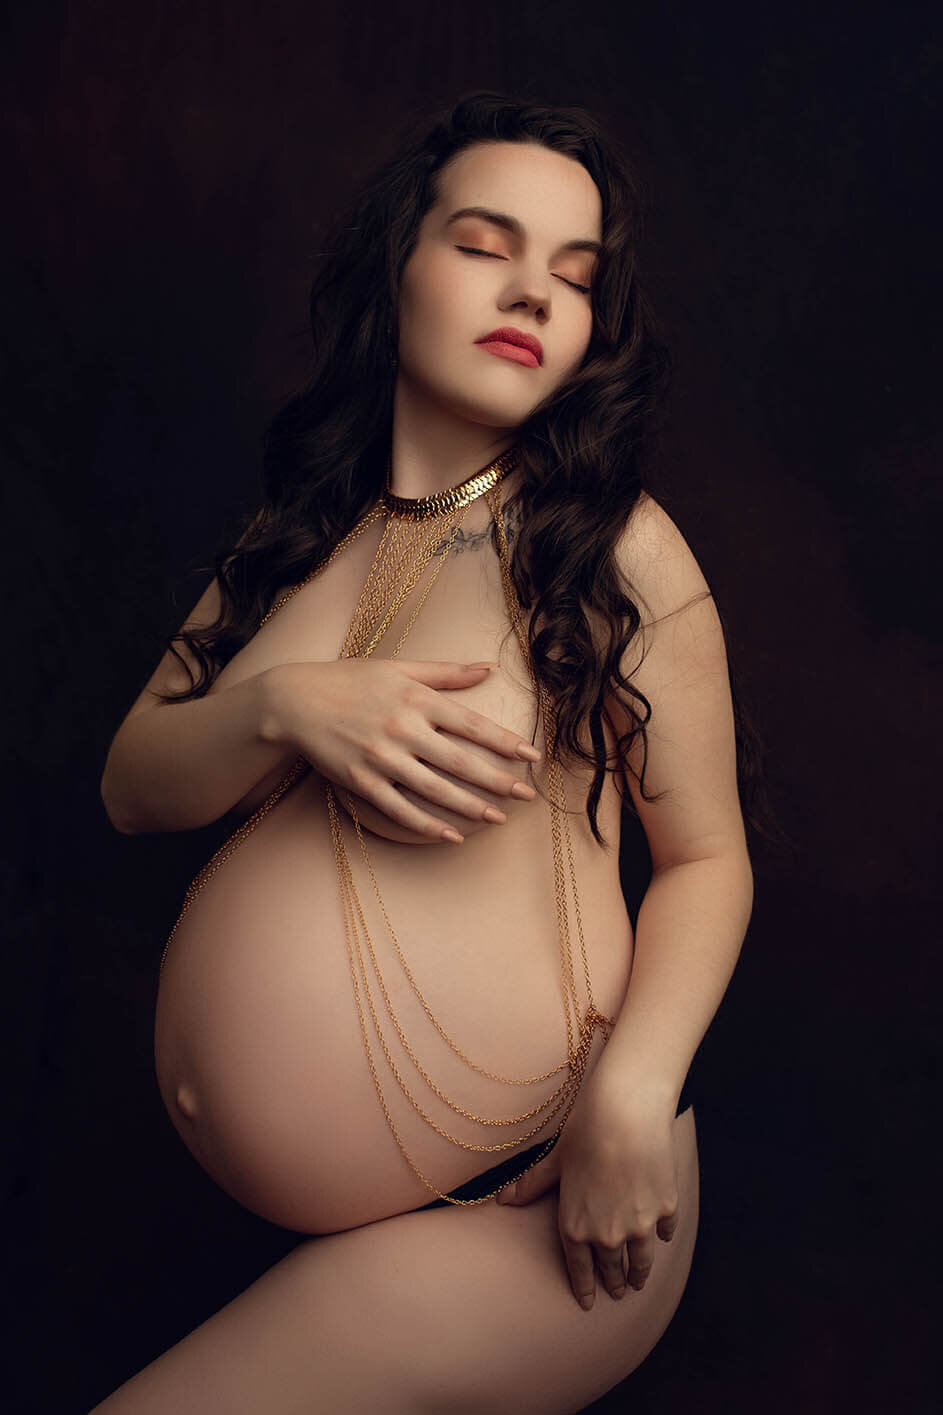 A nude pregnant woman wearing a body chain covering her breasts with her hand her eyes are closed with her head tilted up